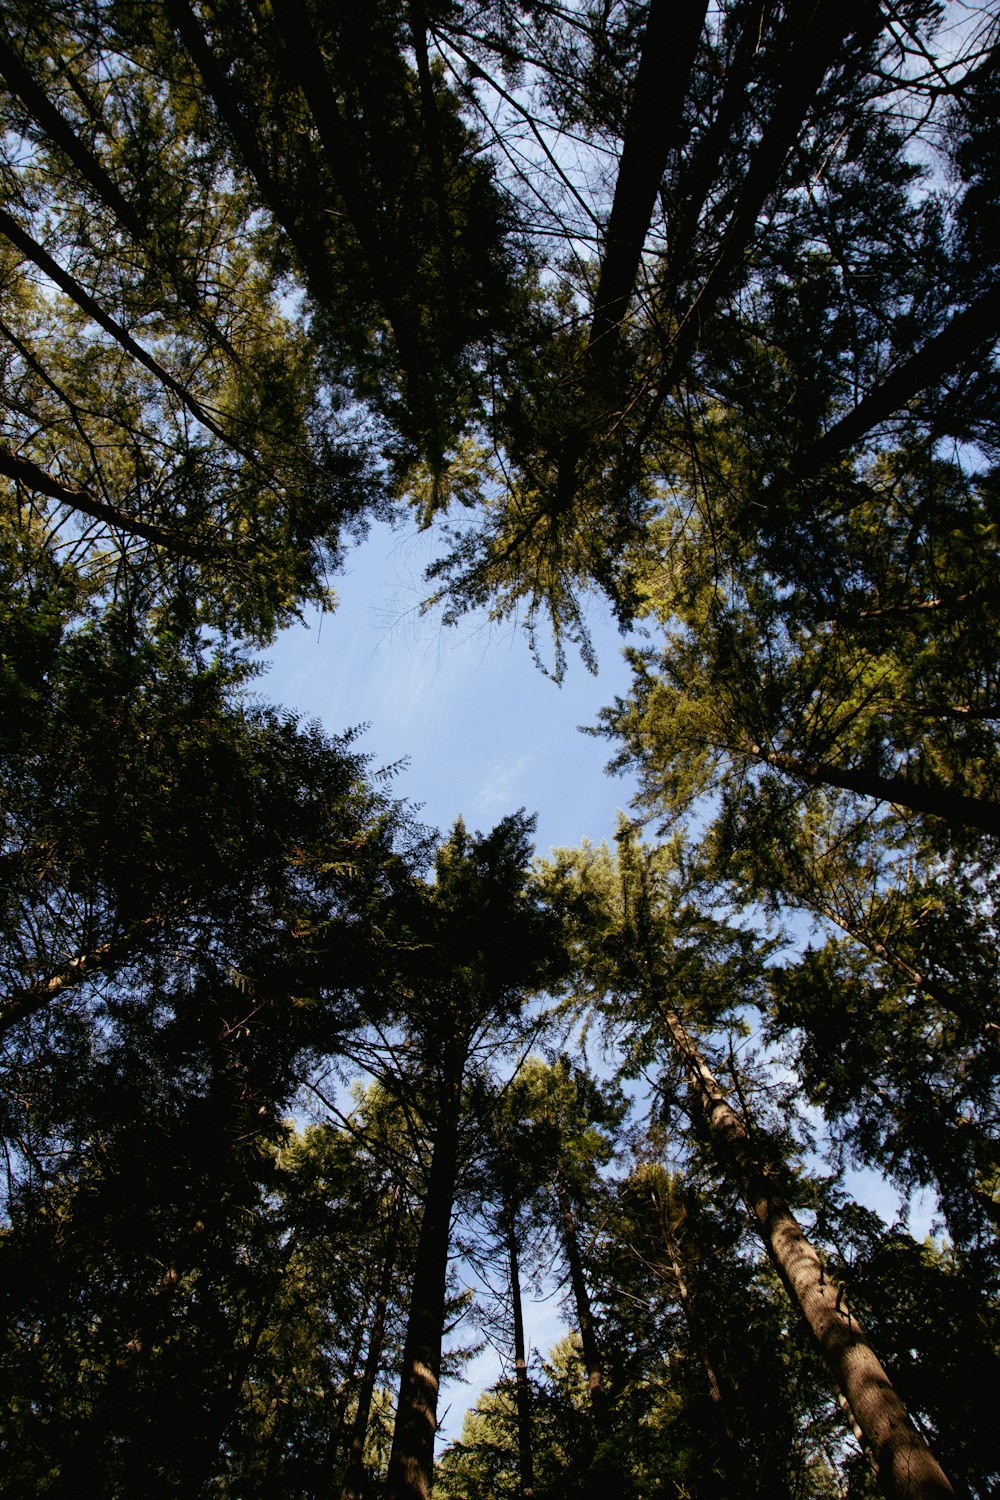 a group of tall trees standing next to each other